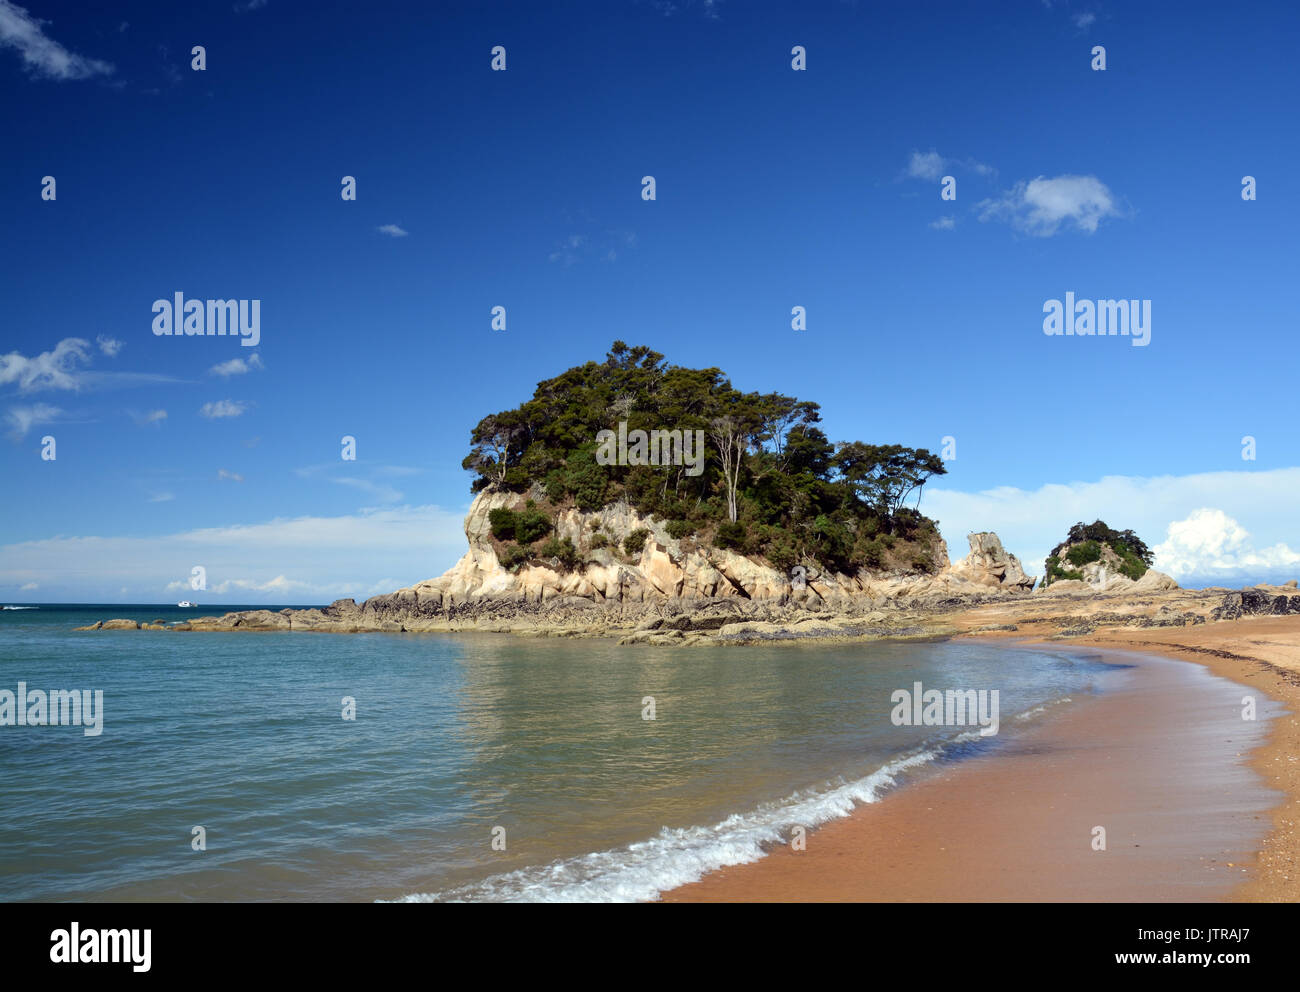 The golden sands & crystal clear water at Kaiteriteri beach, New Zealand with copy space. Stock Photo